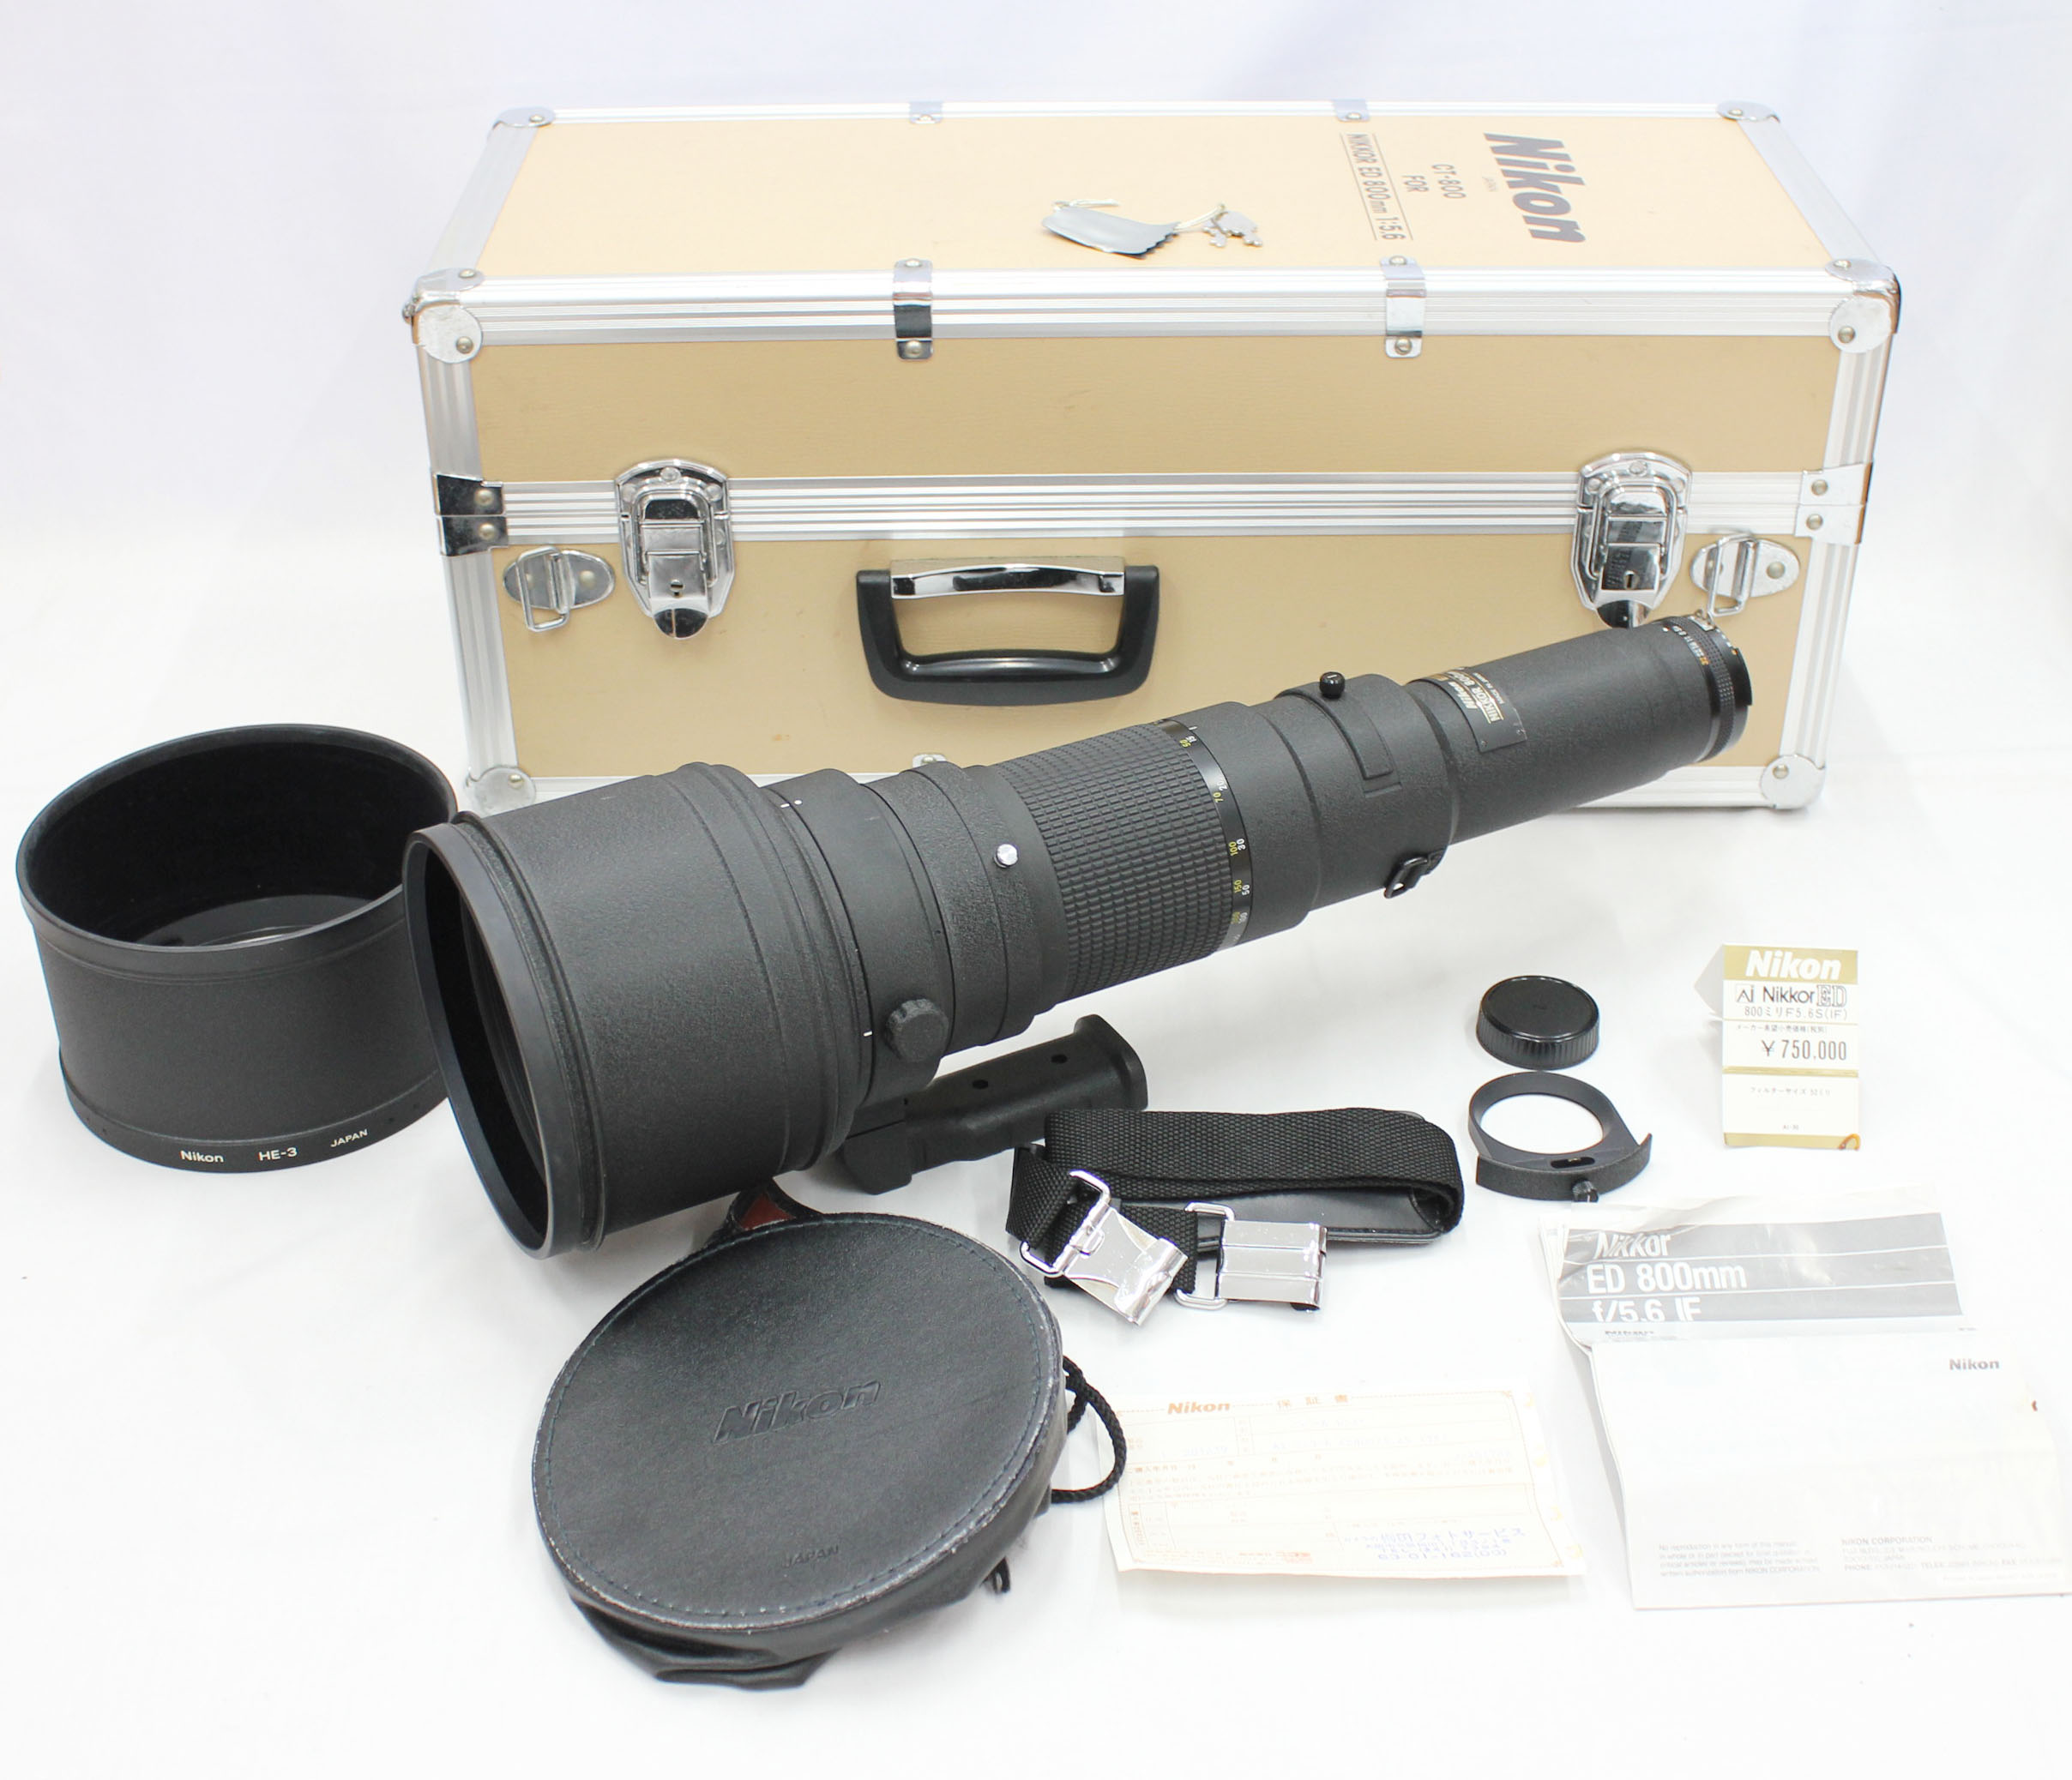 Japan Used Camera Shop | [Near Mint] Nikon Ai-s Ais Nikkor ED 800mm F/5.6 IF Telephoto Lens in Case from Japan